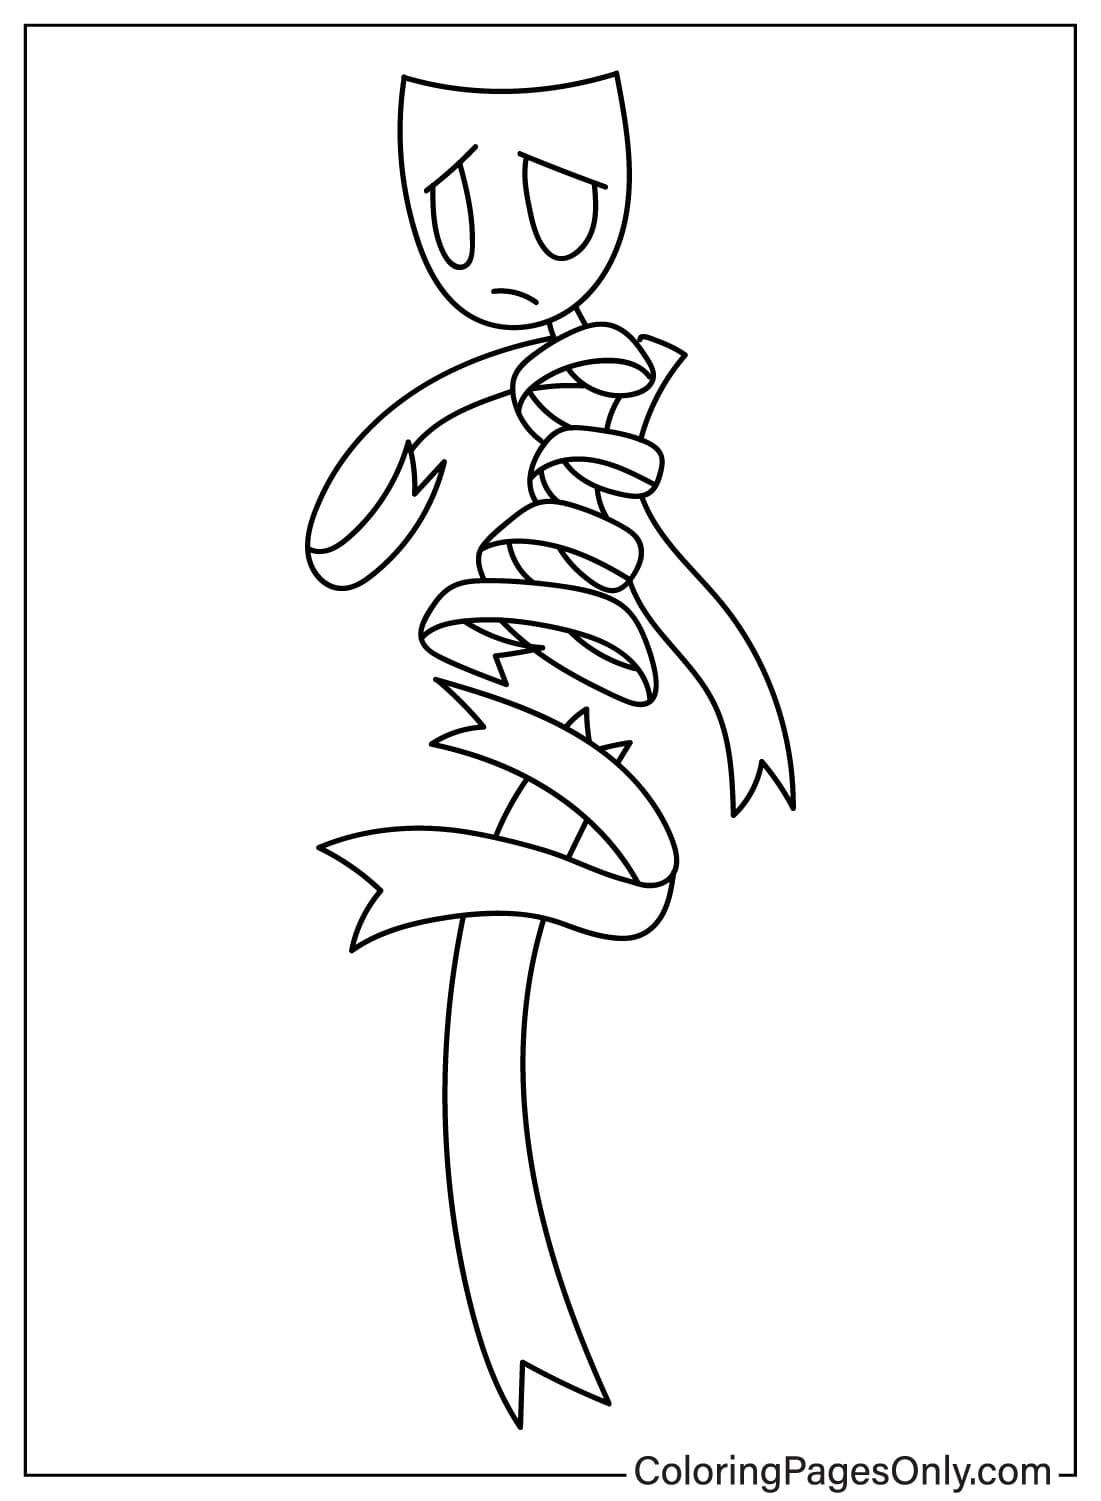 Gangle Images Coloring Page from Gangle